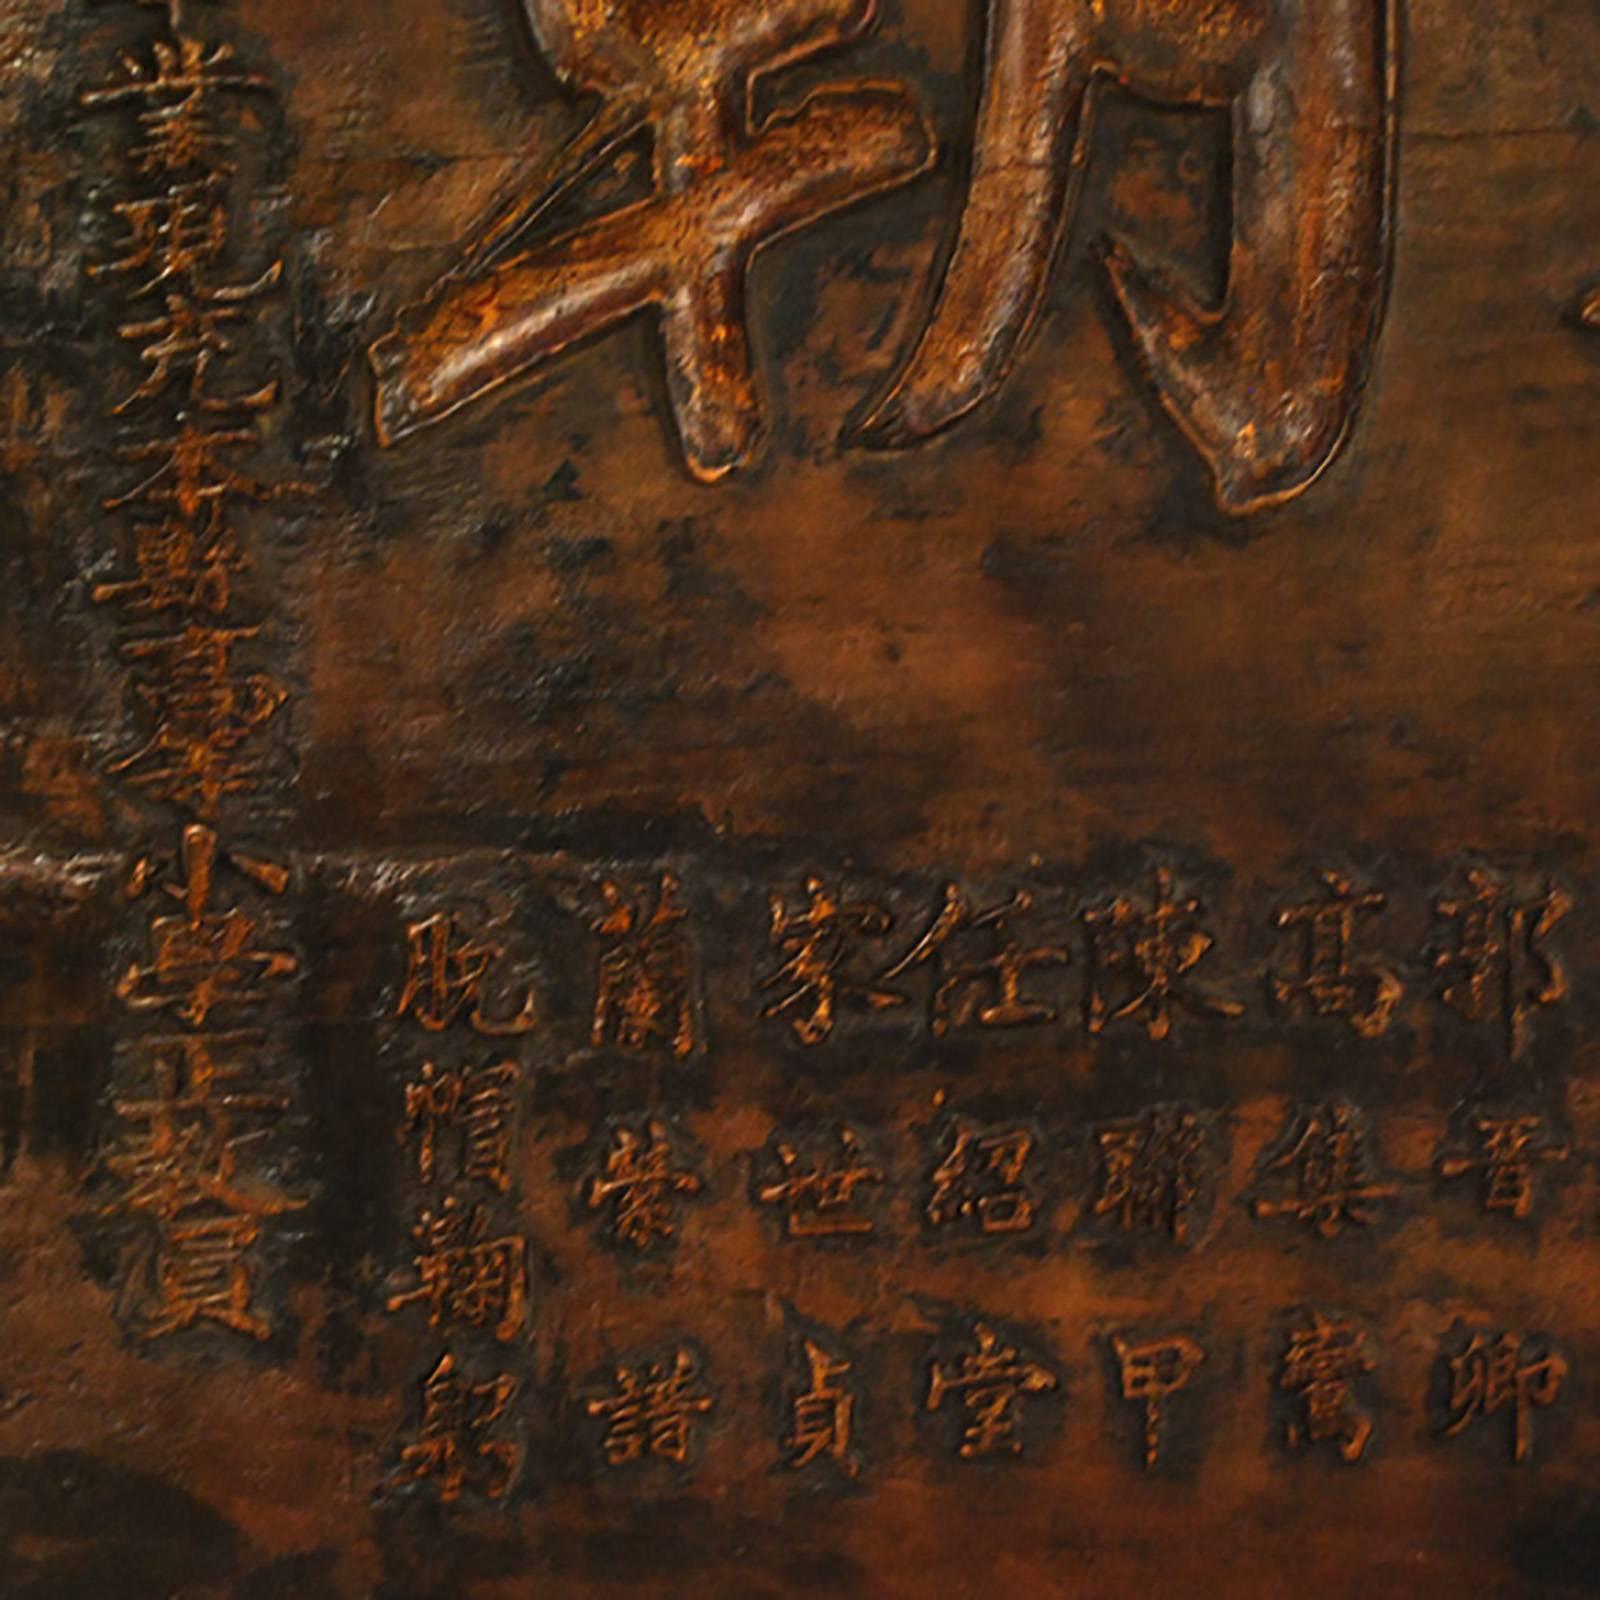 A 19th century Northern Chinese sign of honor presented to an esteemed scholar on his 80th birthday. The large characters in the center read (from right to left), 